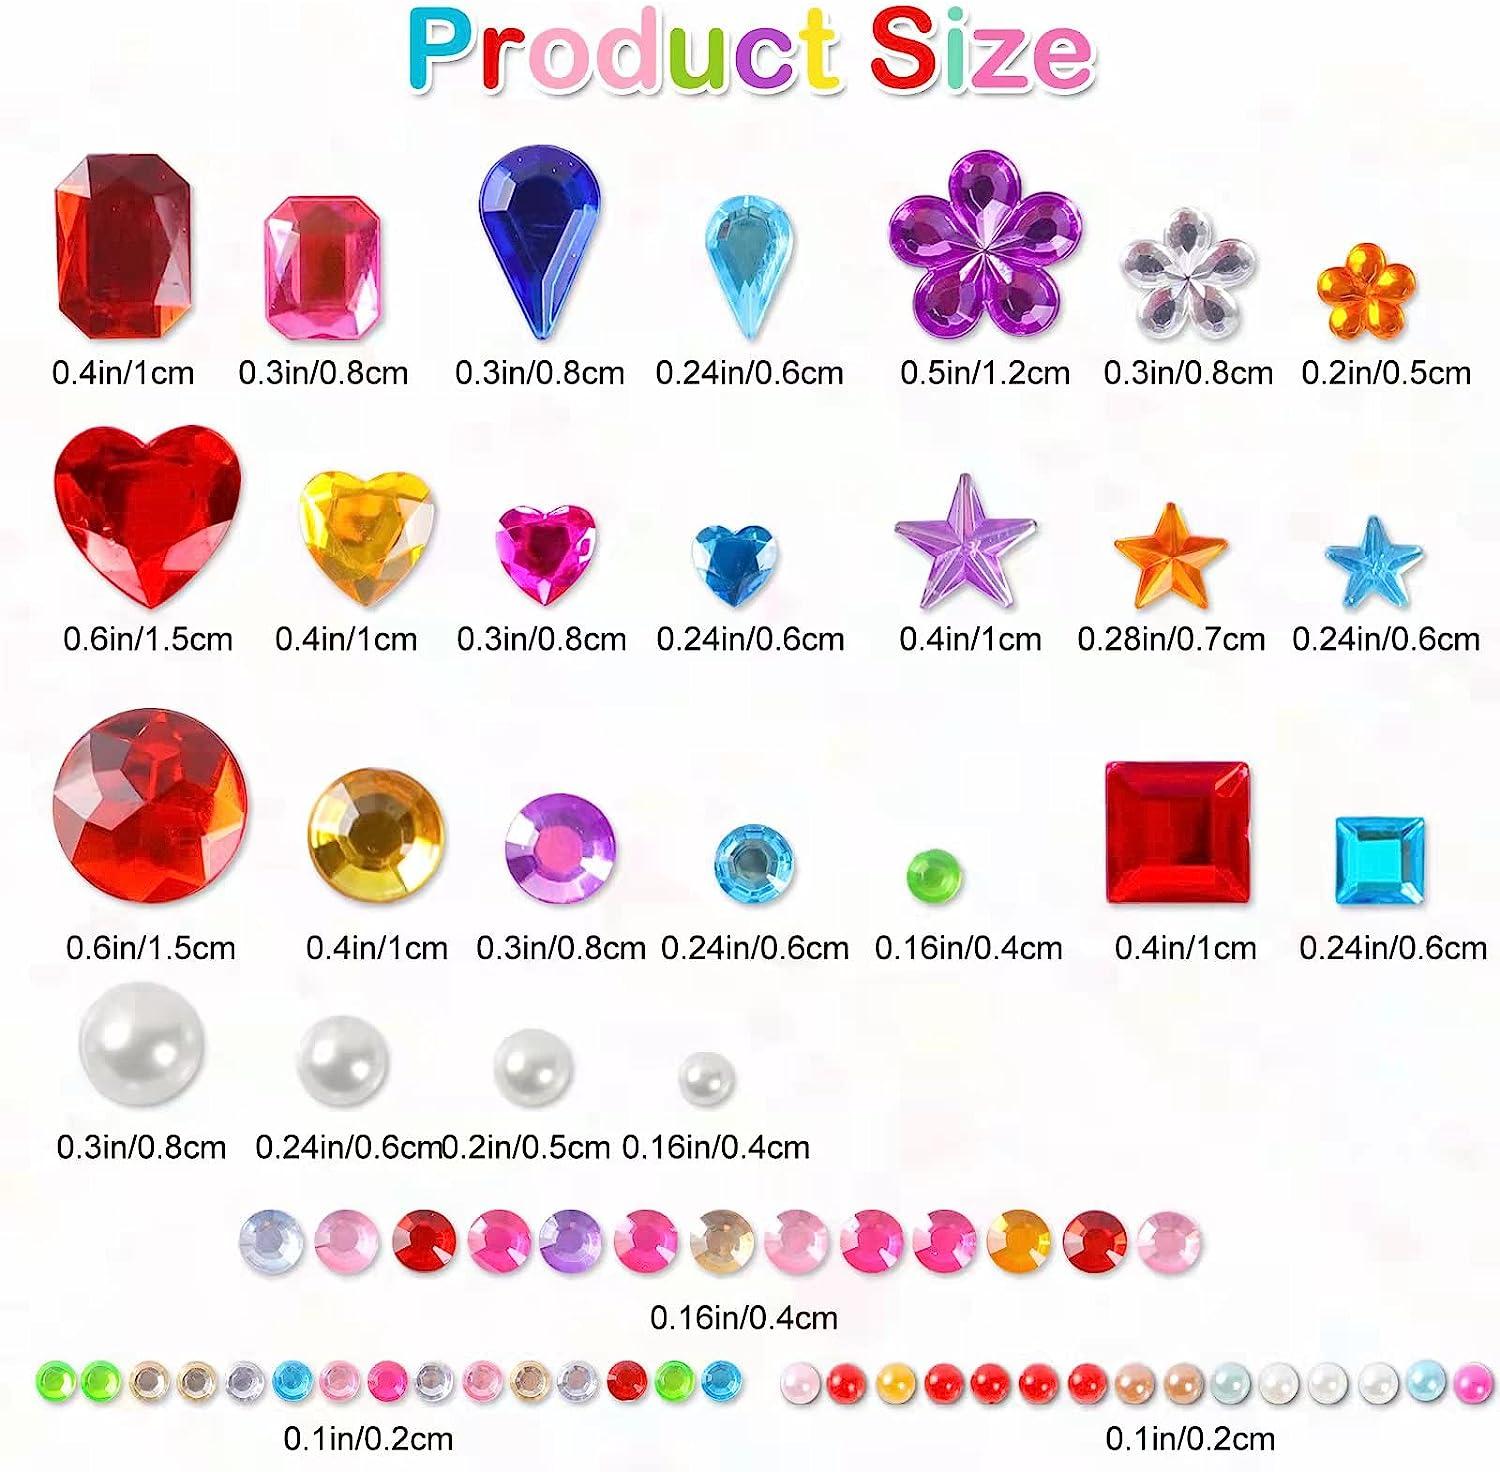 Red Heart Bling Stickers